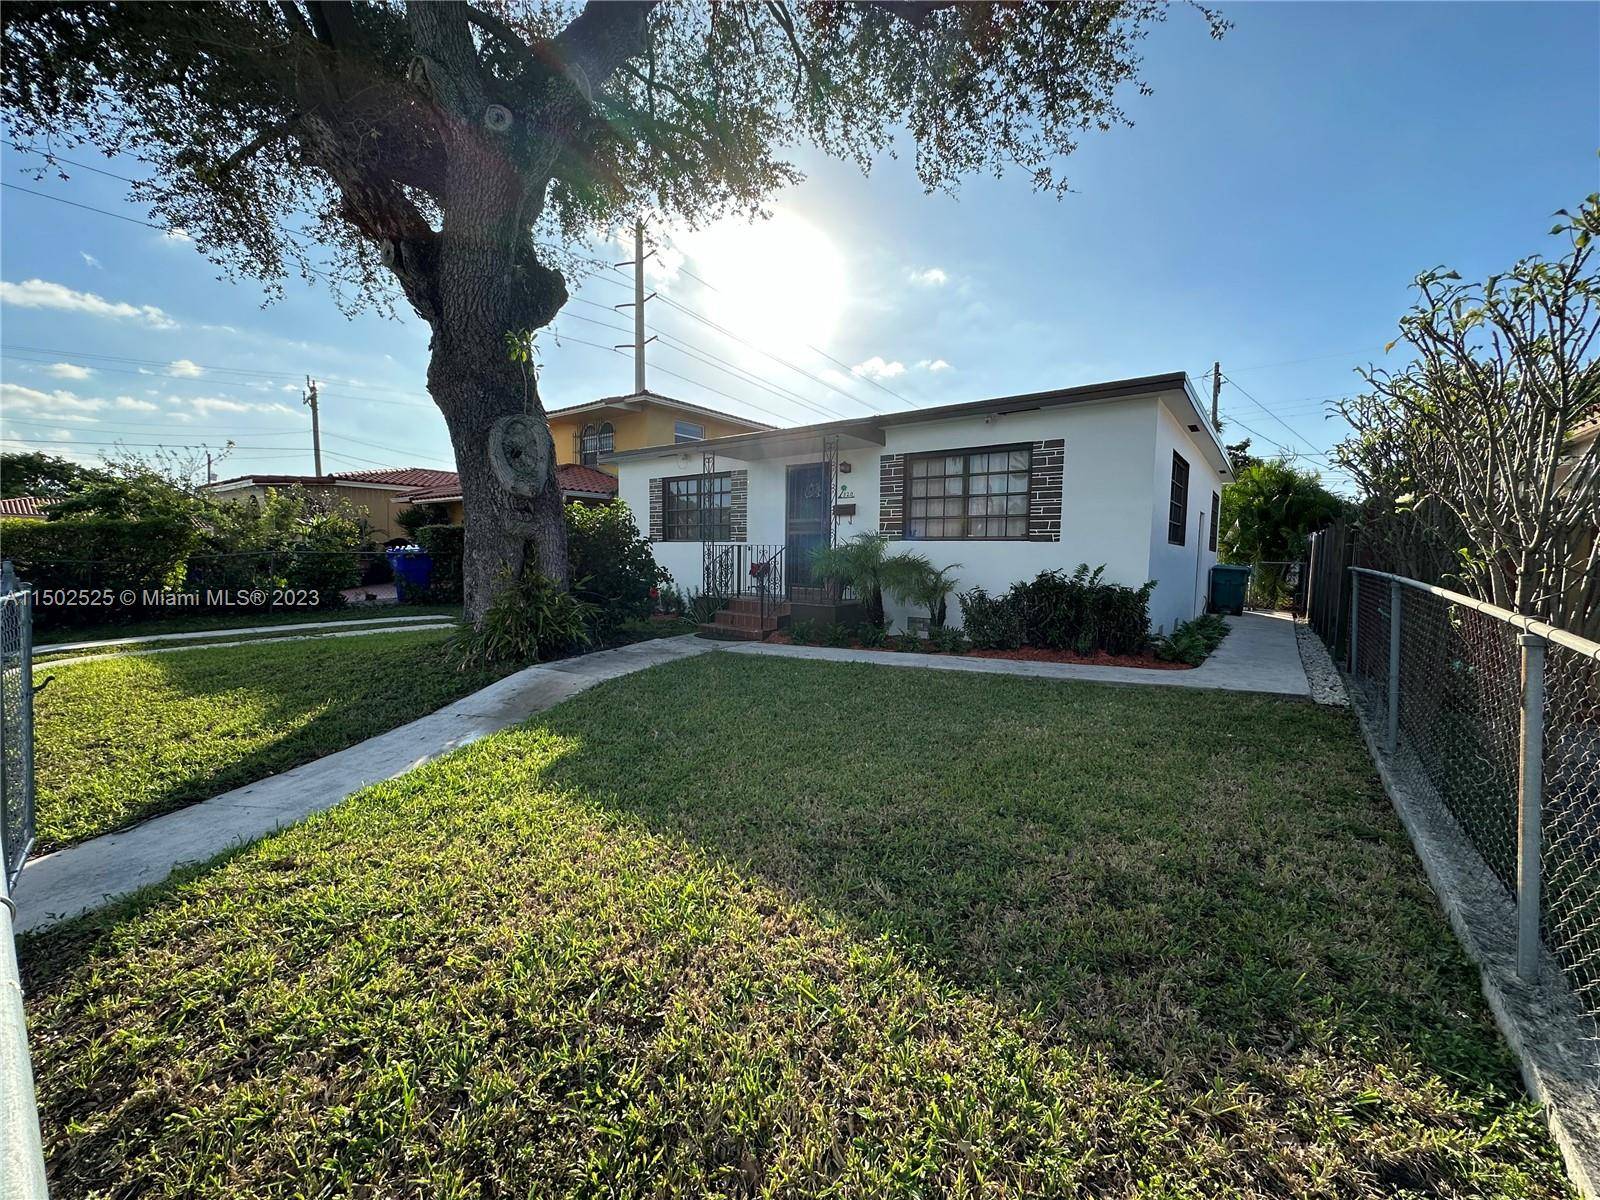 Beautifully well kept 4 beds 3baths home centrally located and in close proximity to great schools, restaurants, shopping centers, and major highways.